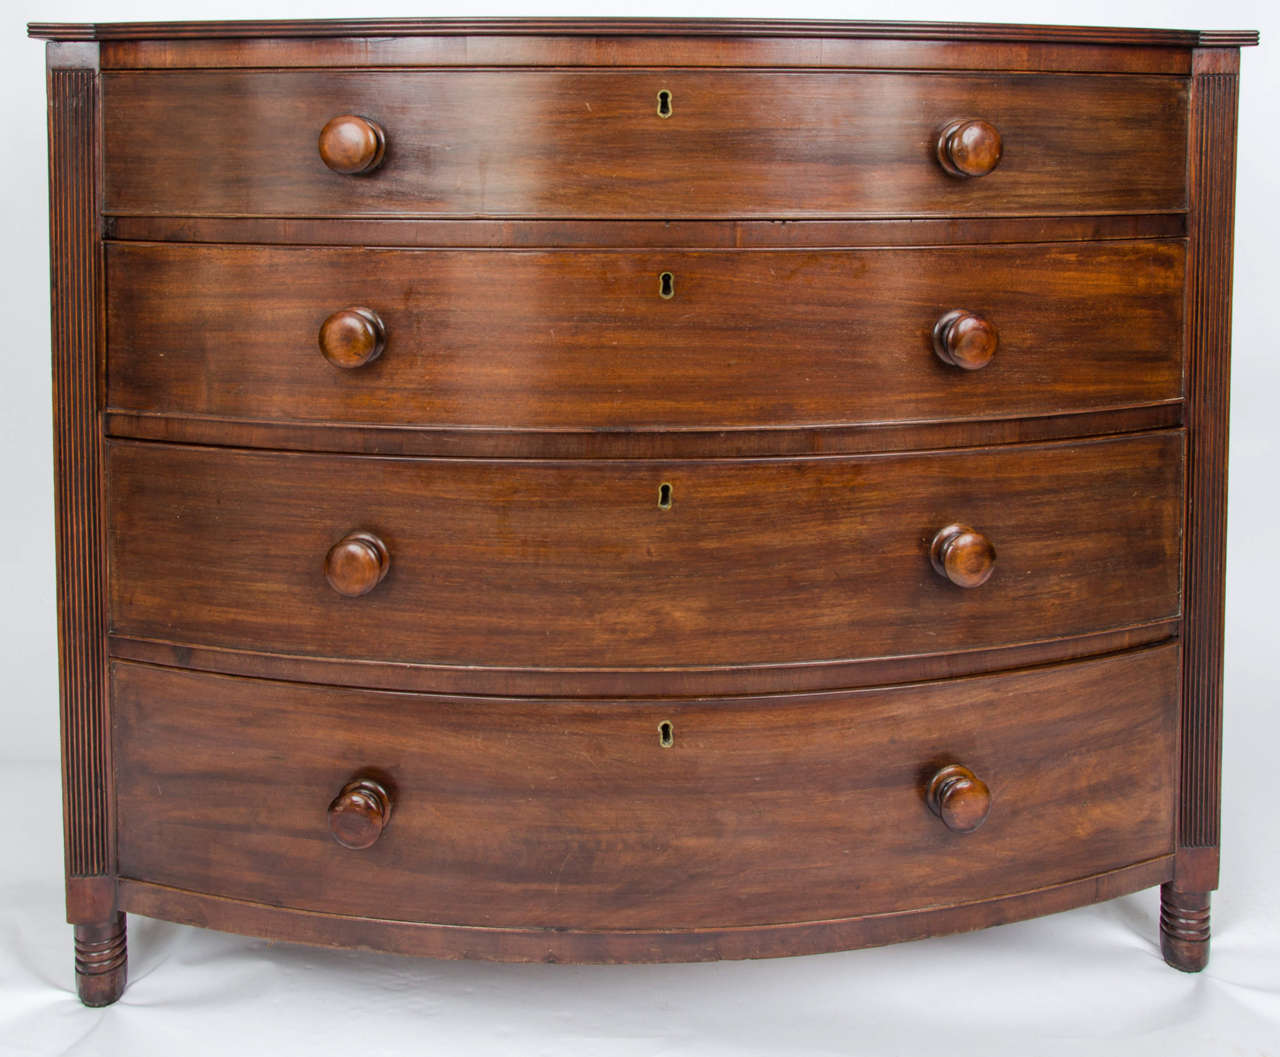 Walnut Georgian Regency Period Bow Fronted Chest with Reeded Detail, English circa 1825 For Sale